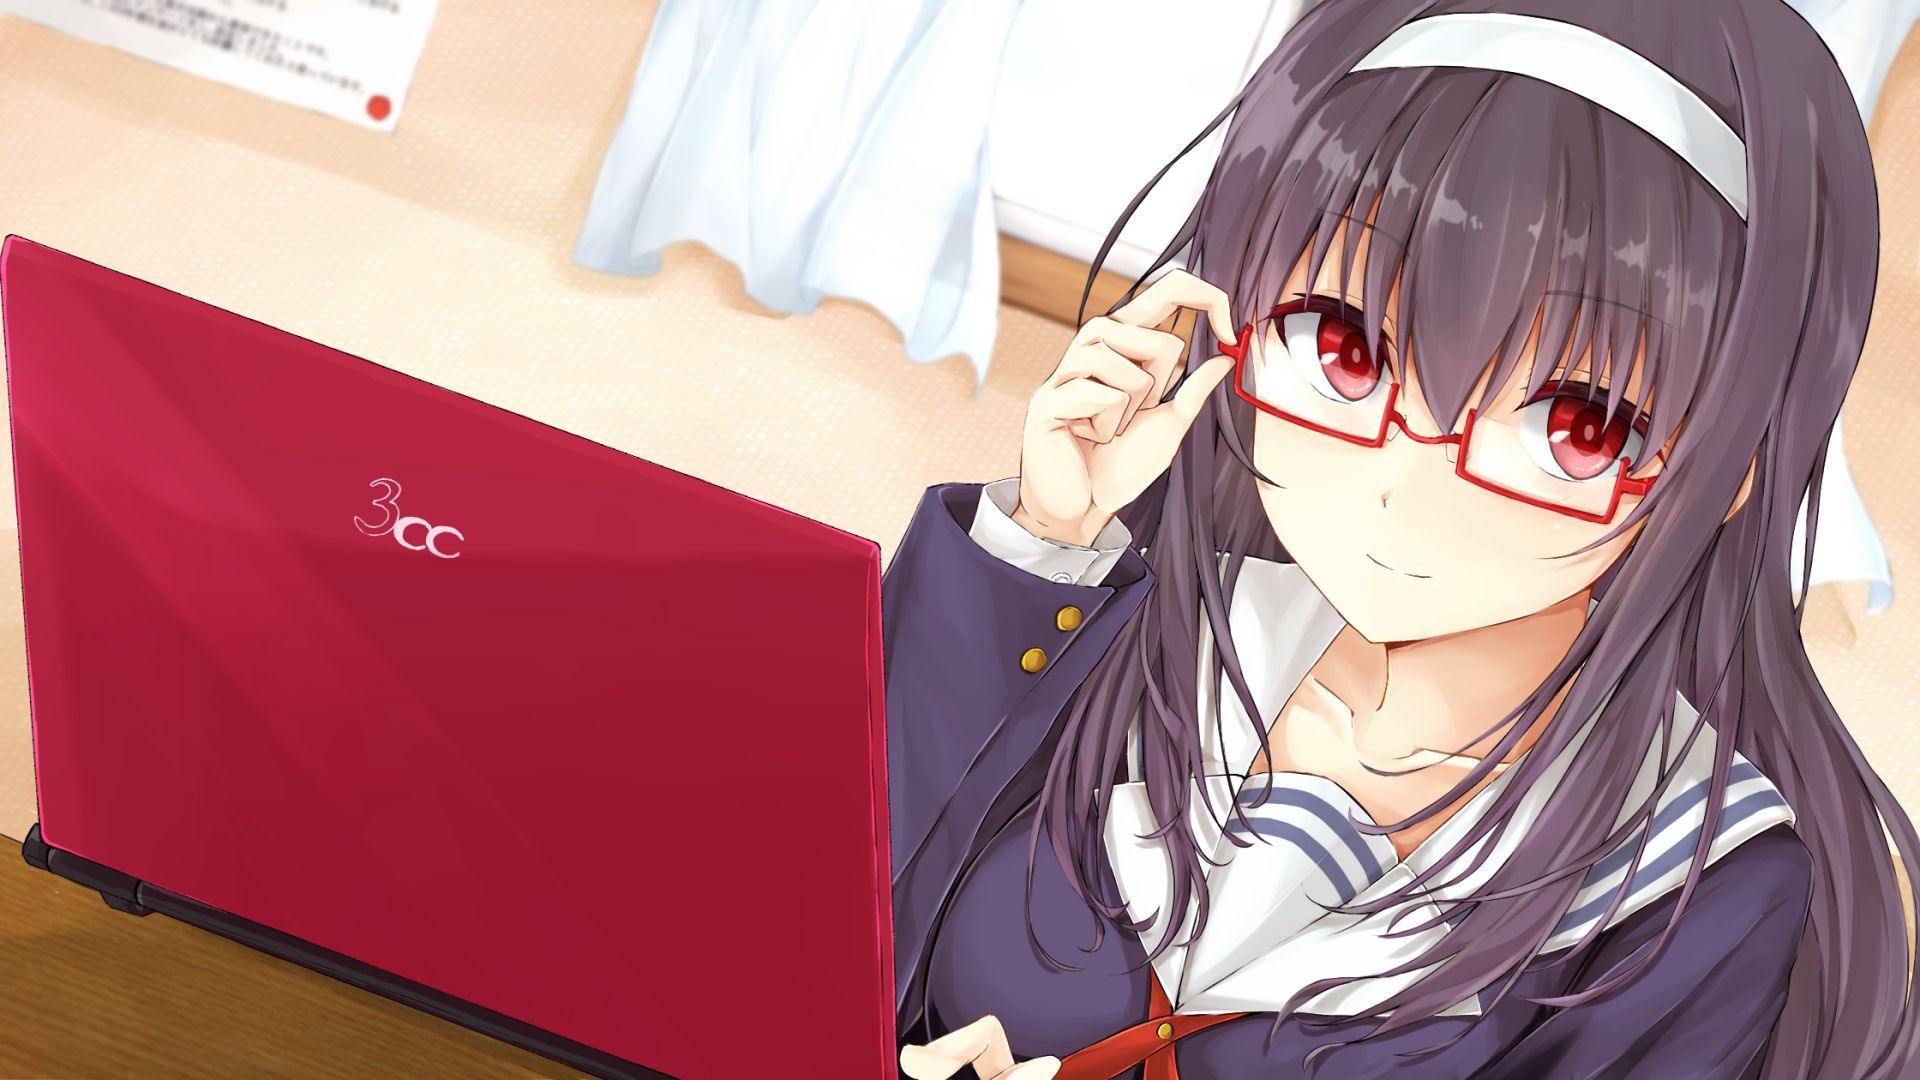 The glasses are the body! It looks like a picture while reconfirming the cuteness of the glasses daughter Wwww 10